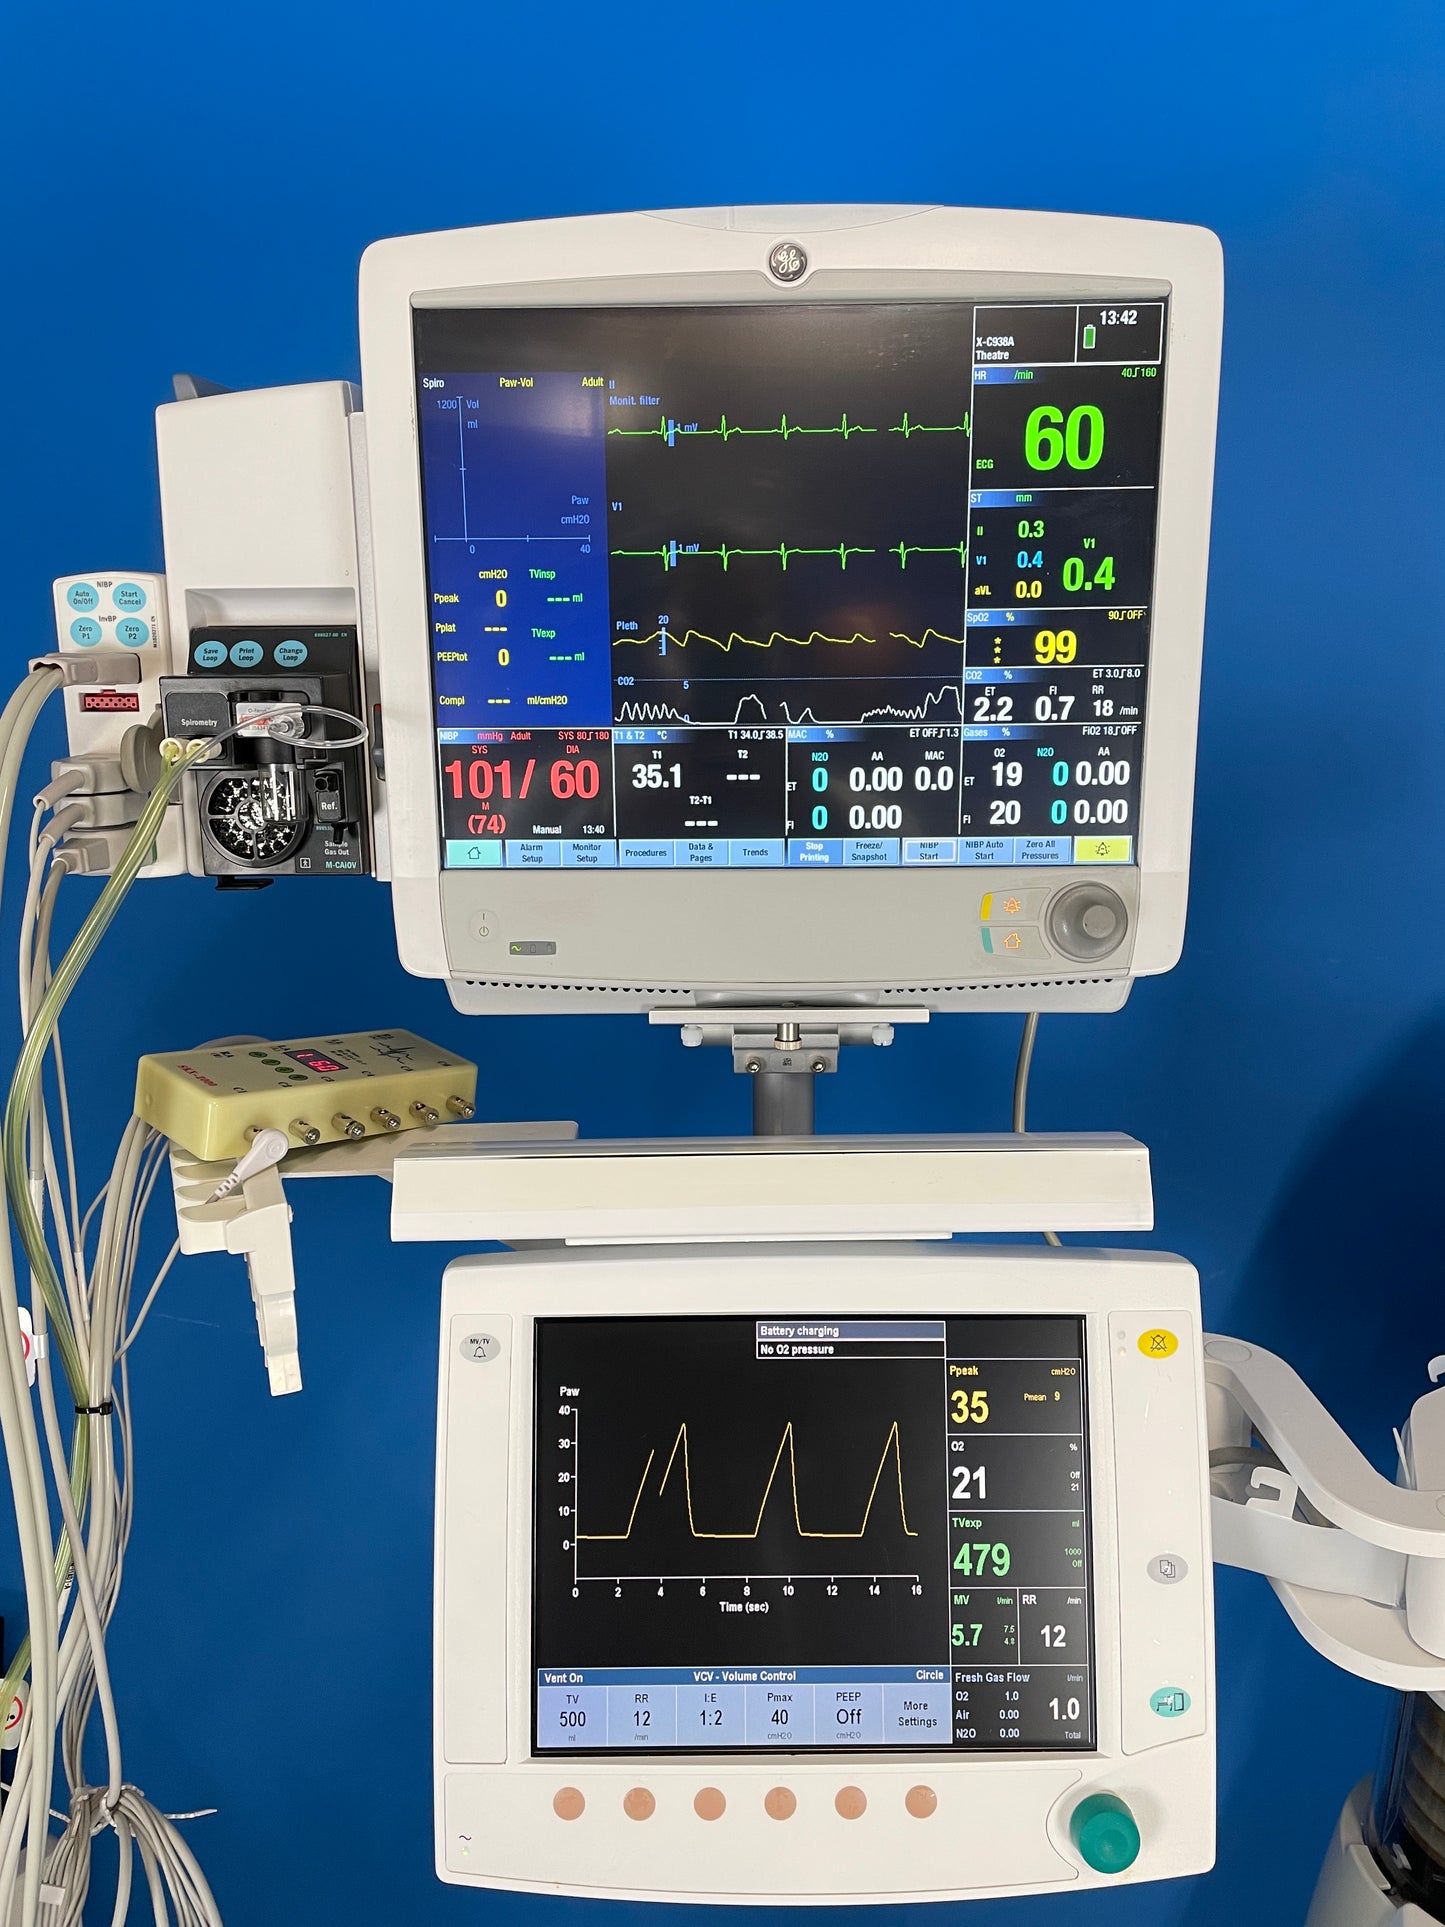 Anesthesia B650 Monitor with modules and Aespire View uses the GE SmartVent 7900 as the ventilator system for the anesthesia machine.